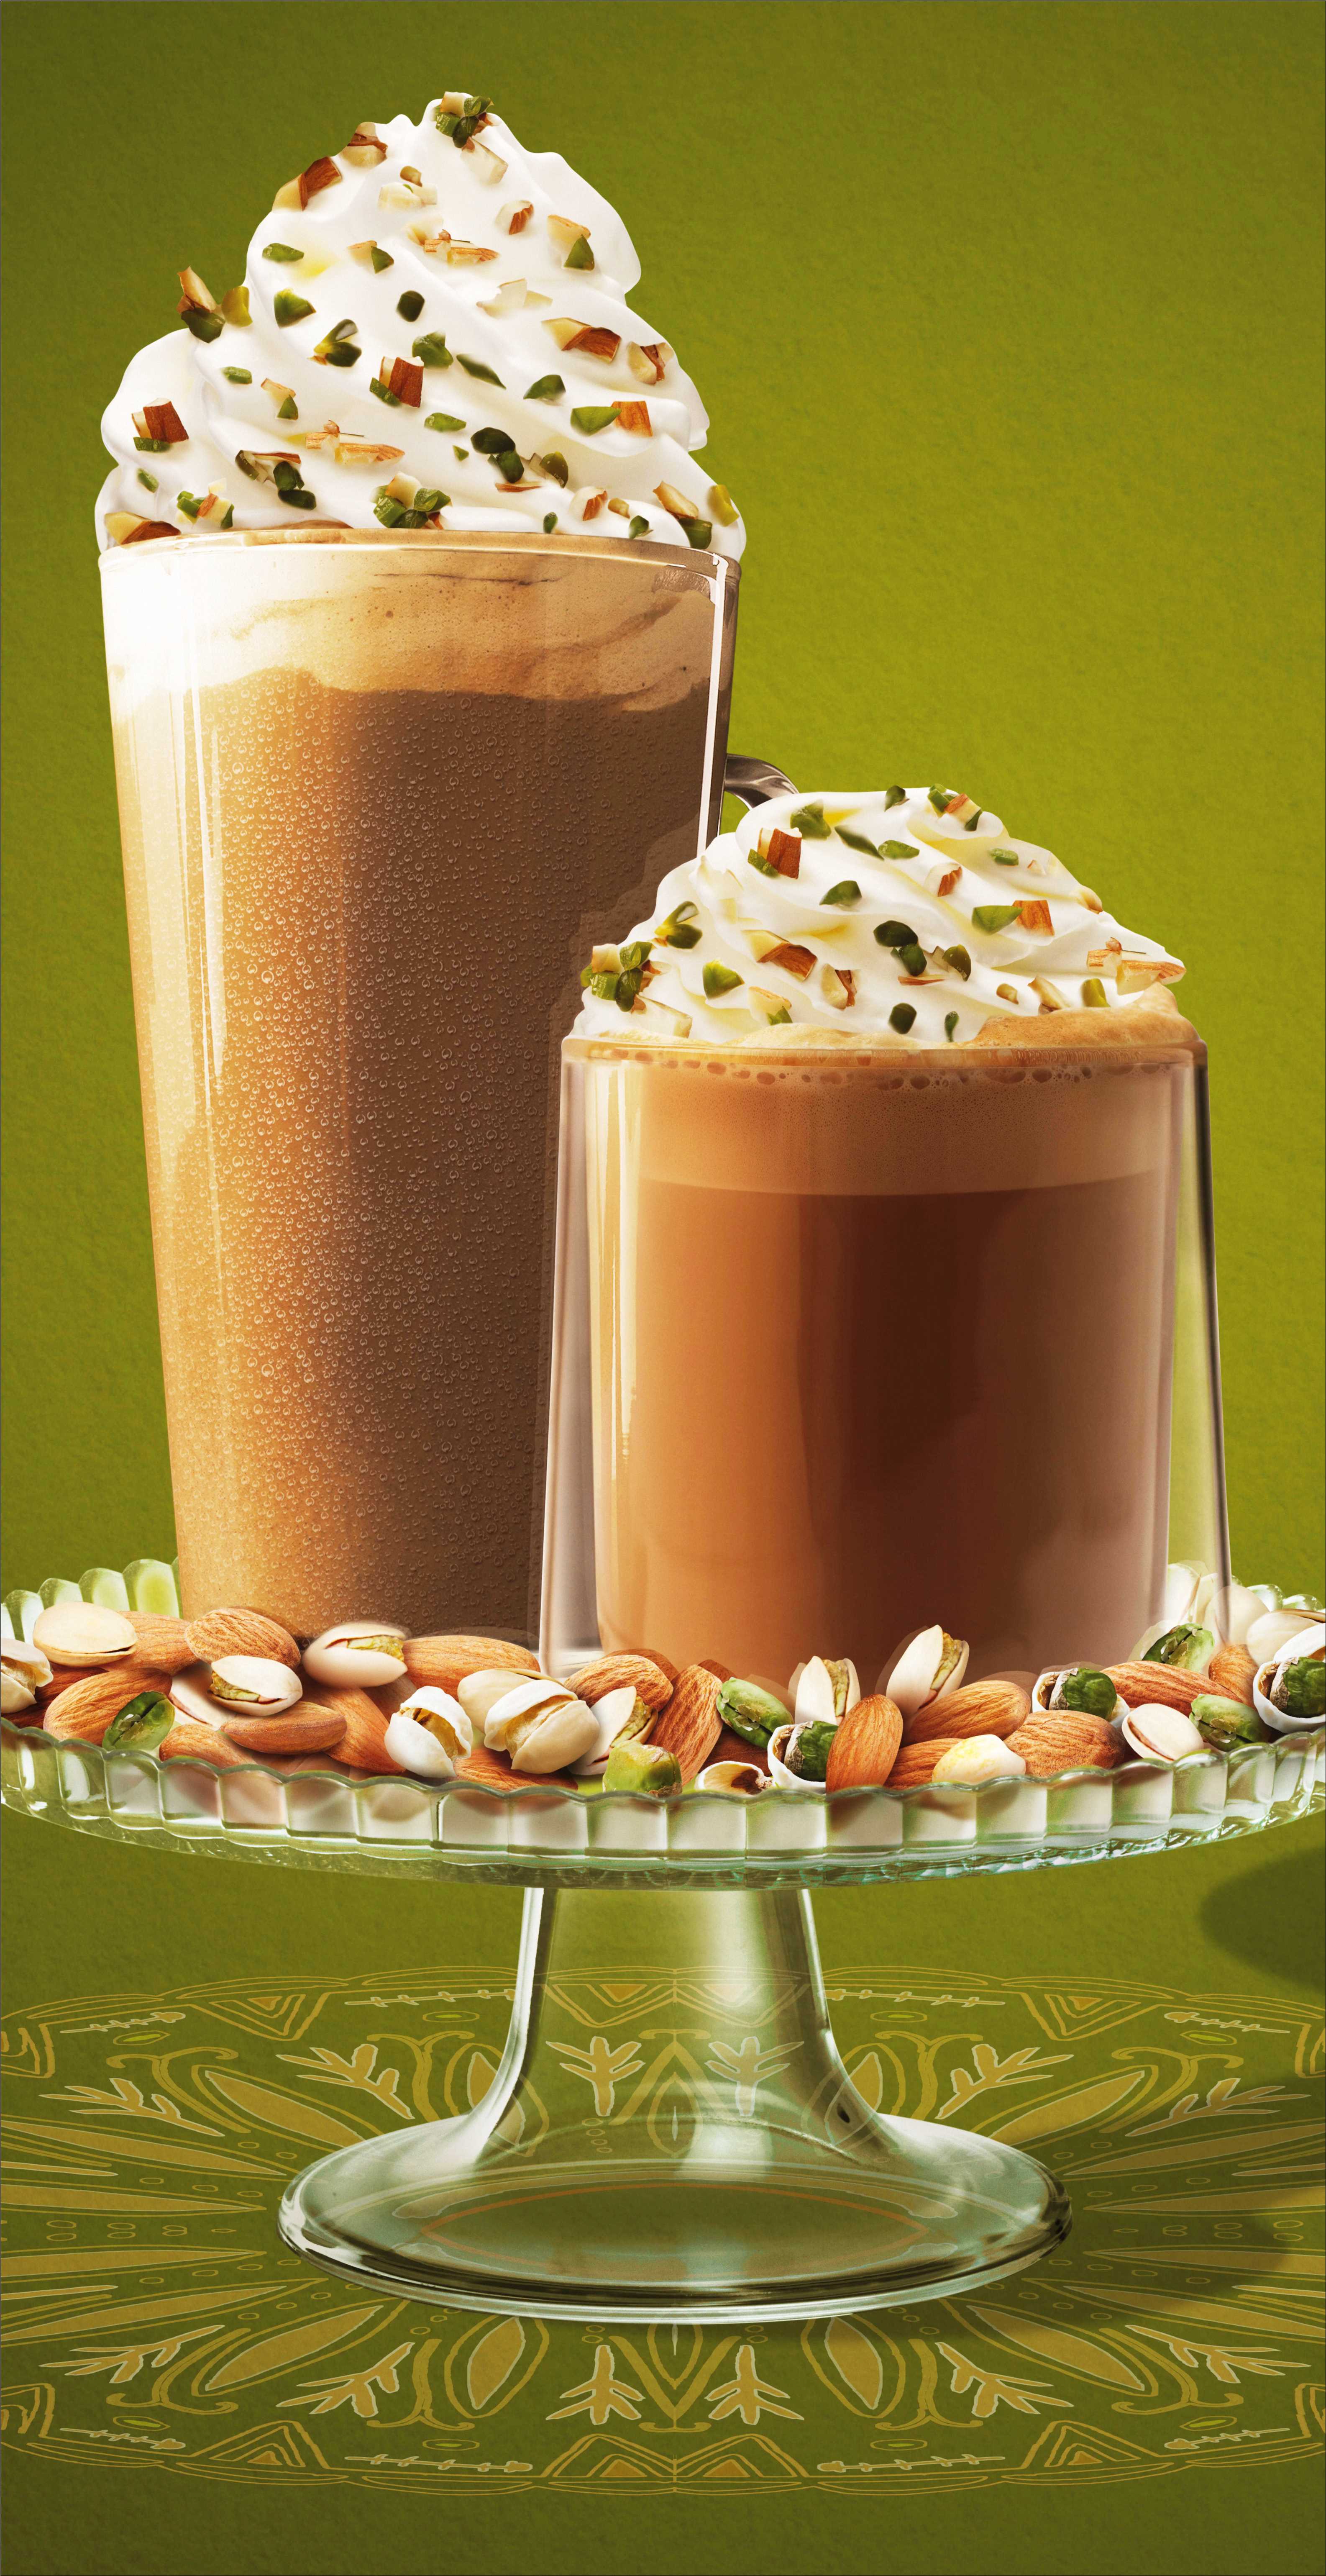 You are currently viewing Celebrate special moments this Diwali with Starbucks’ Indulgences